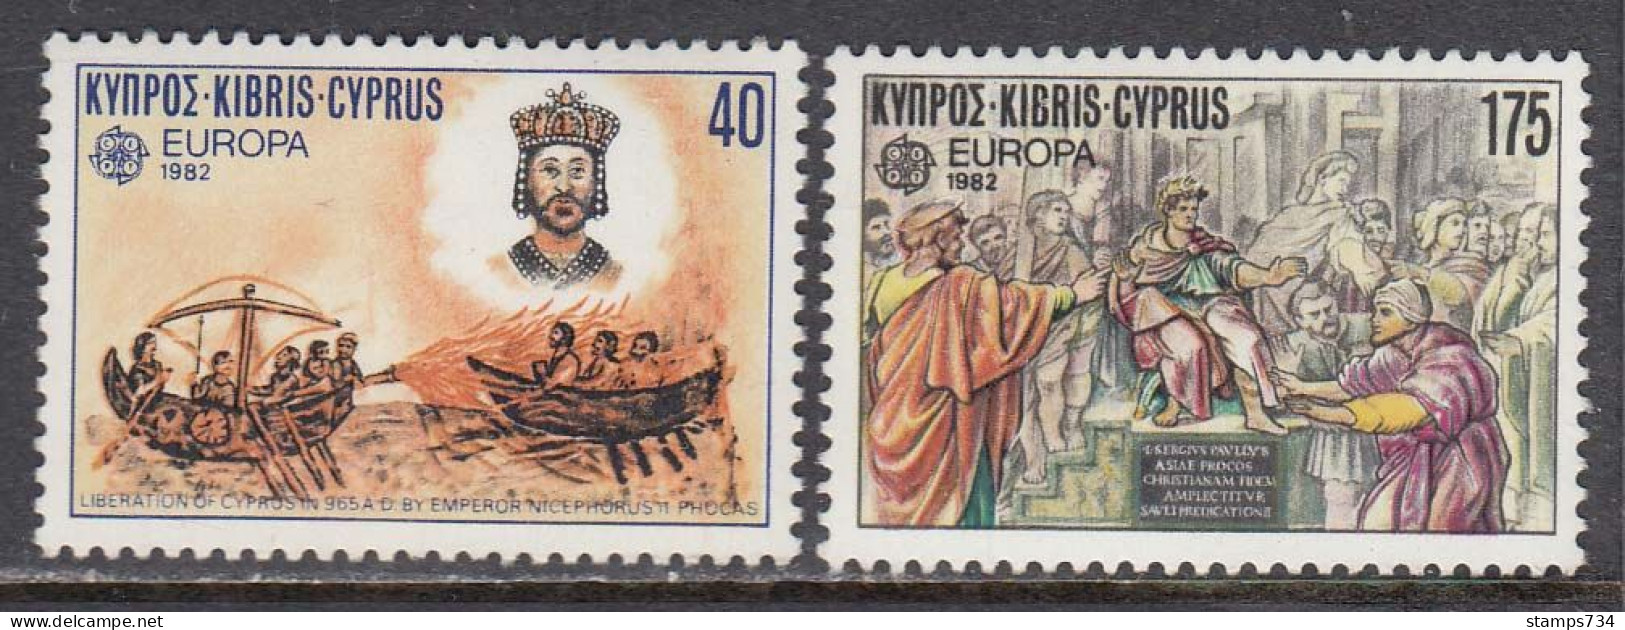 Cyprus 1982 - EUROPA(Faits Historiques), Mi-Nr. 566/67, MNH** - Unused Stamps